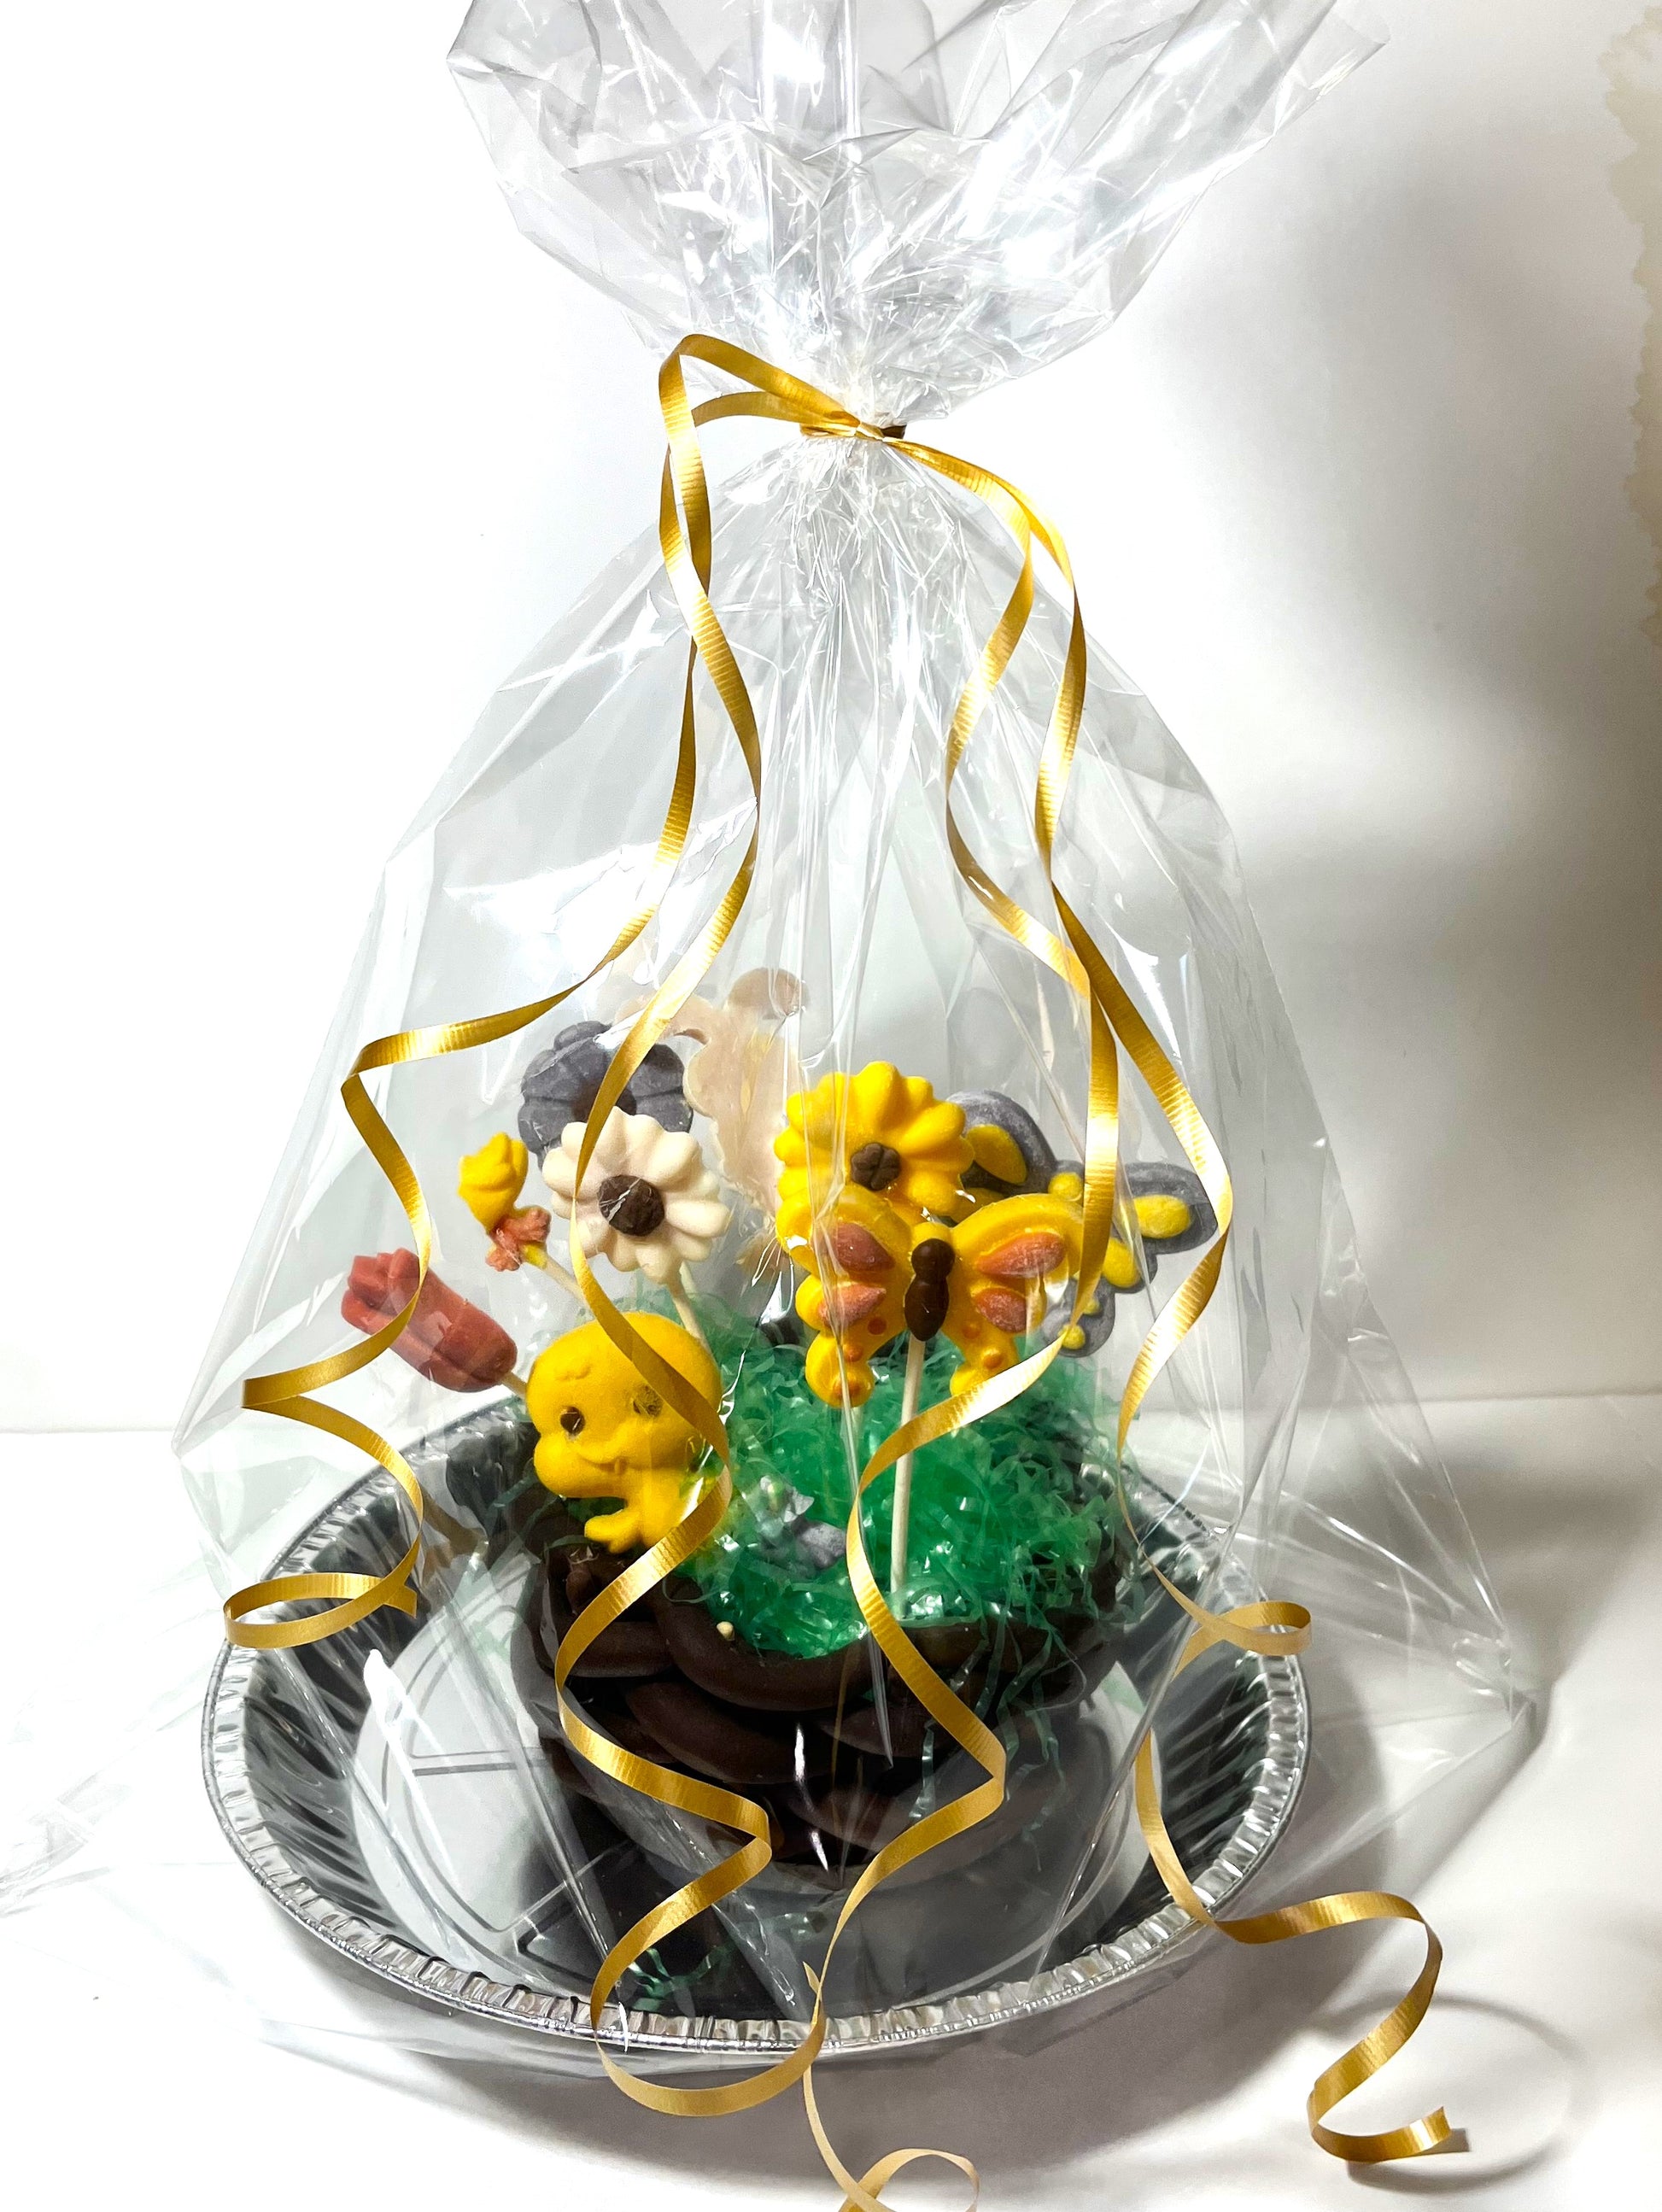 Cellophane basket bag 50x70cms.  Perfect to cover a 12in diameter plate.  Great food packaging source.